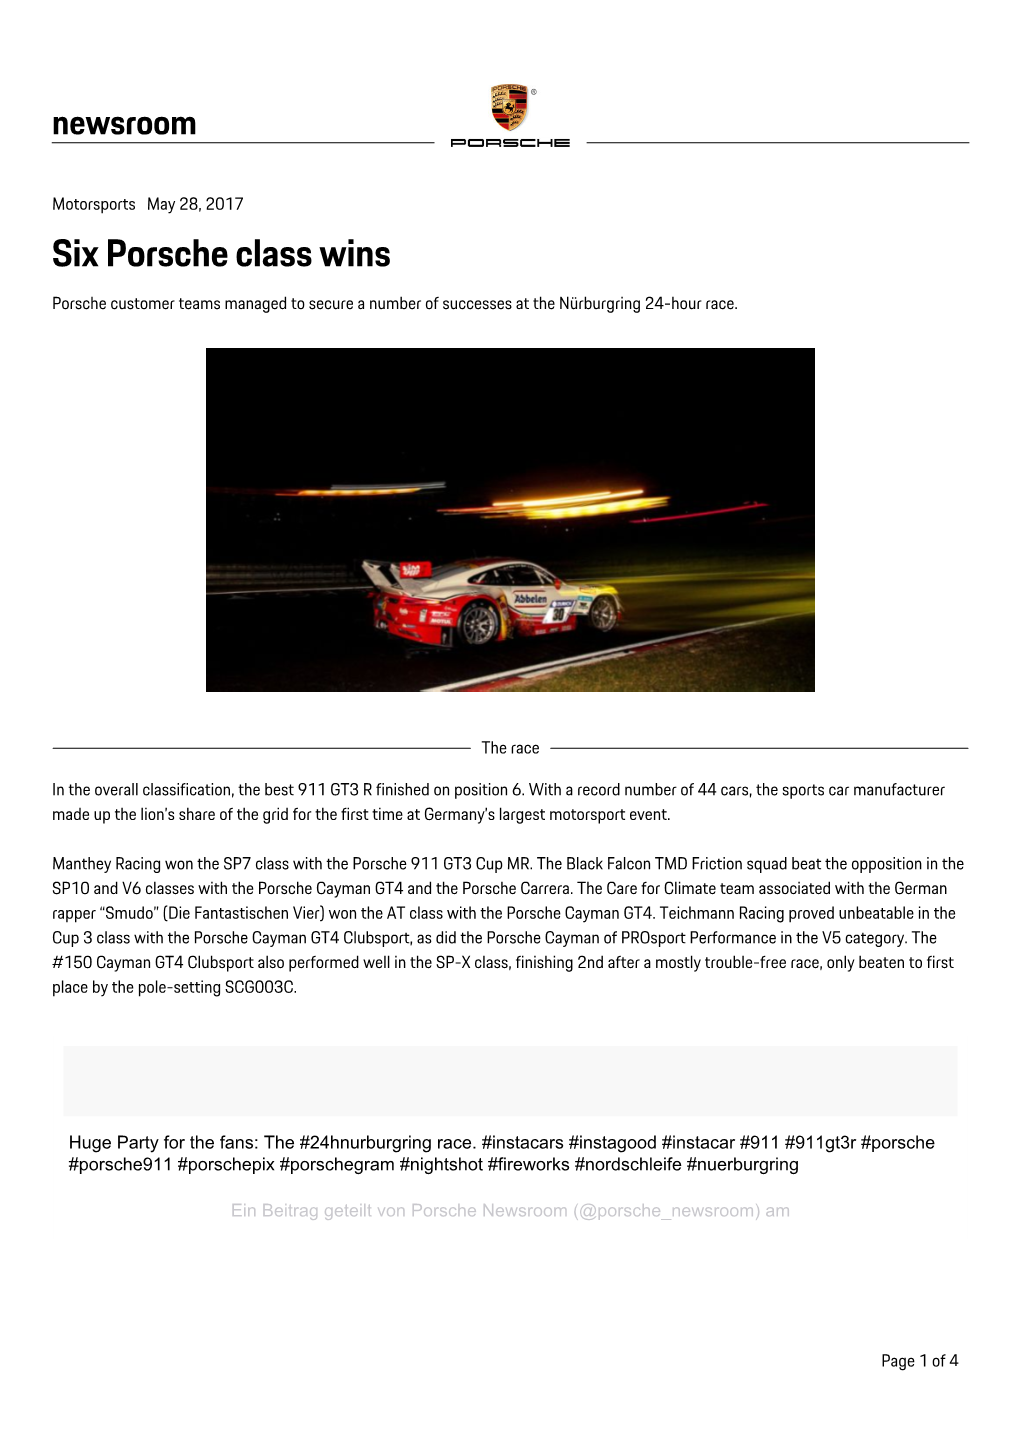 Six Porsche Class Wins Porsche Customer Teams Managed to Secure a Number of Successes at the Nürburgring 24-Hour Race